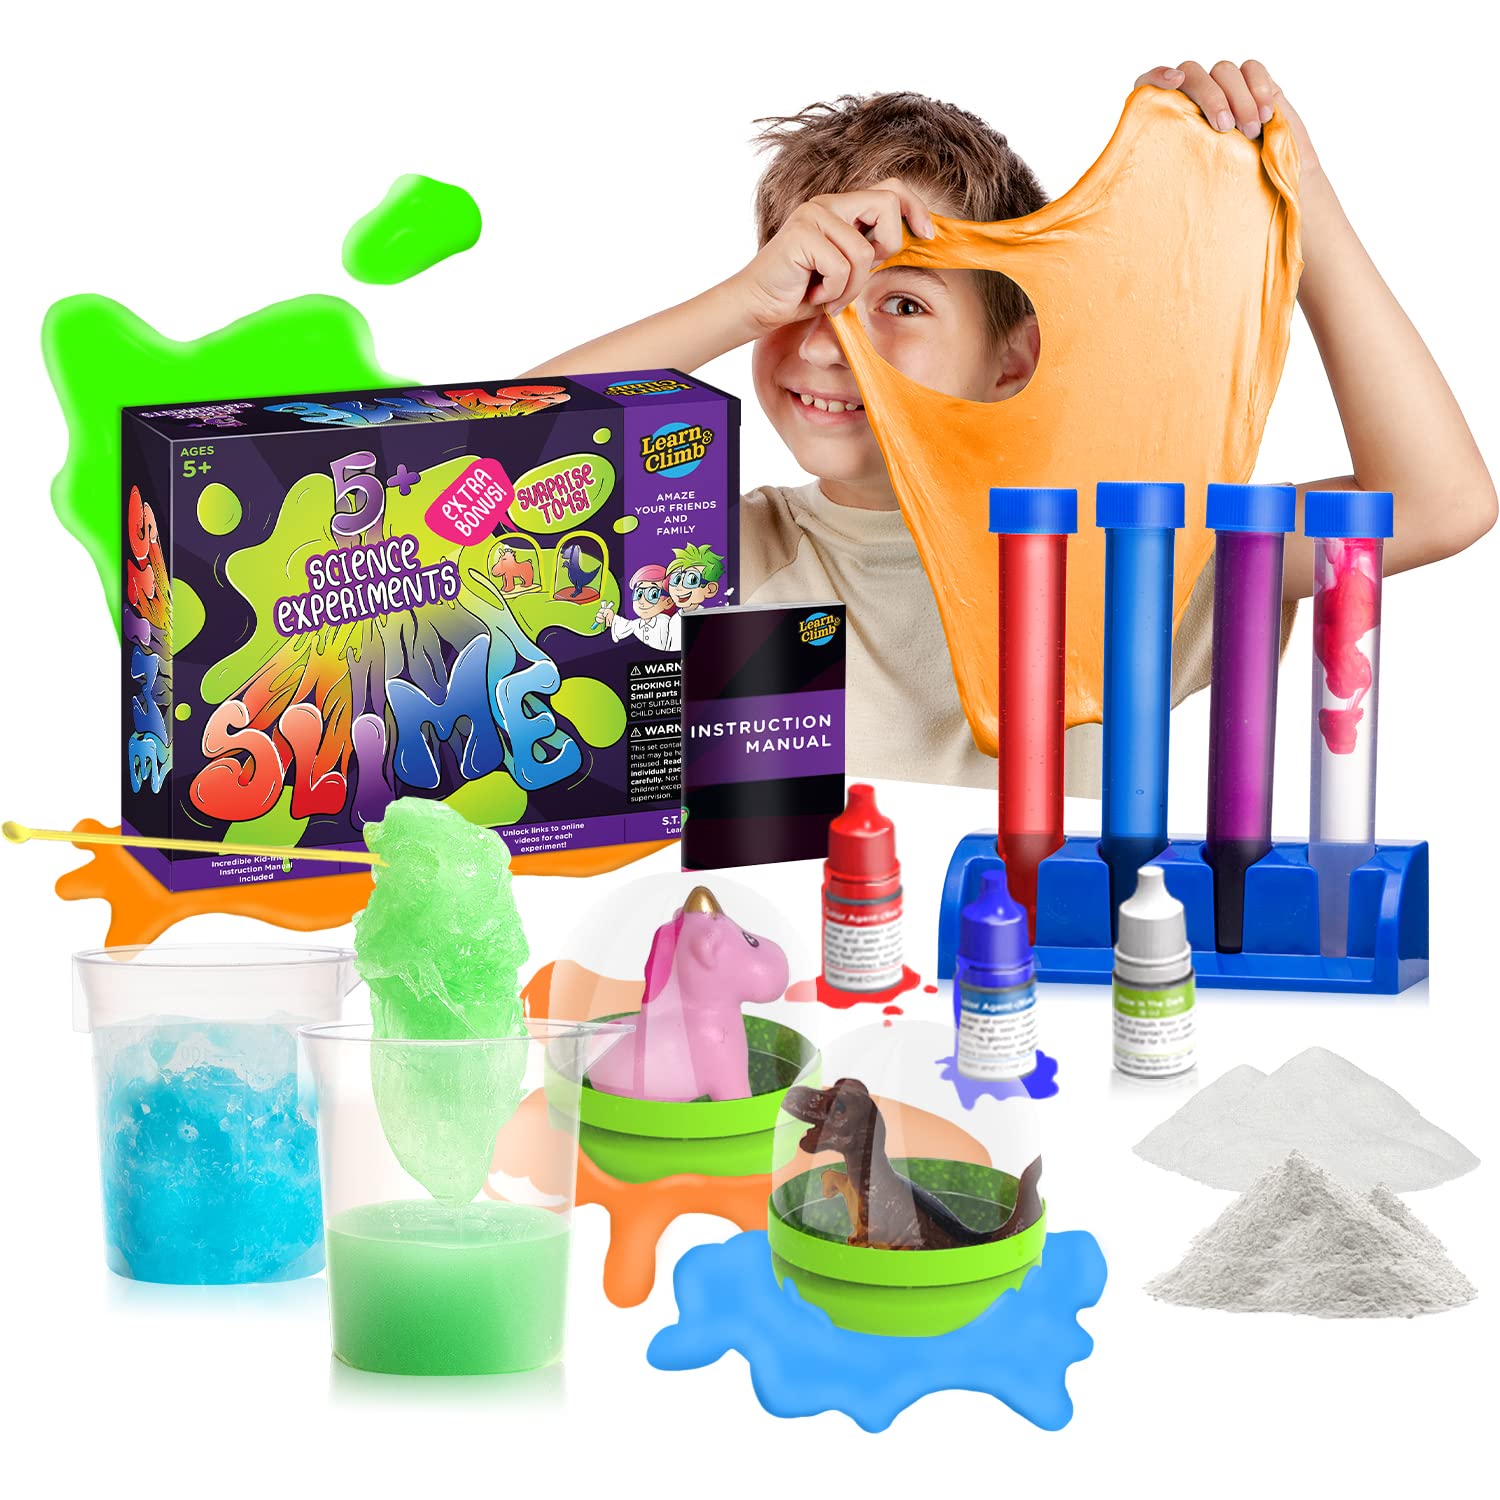 How to Make Slime at home/ My Slime Lab kit unboxing/ #Artncraftcreative 